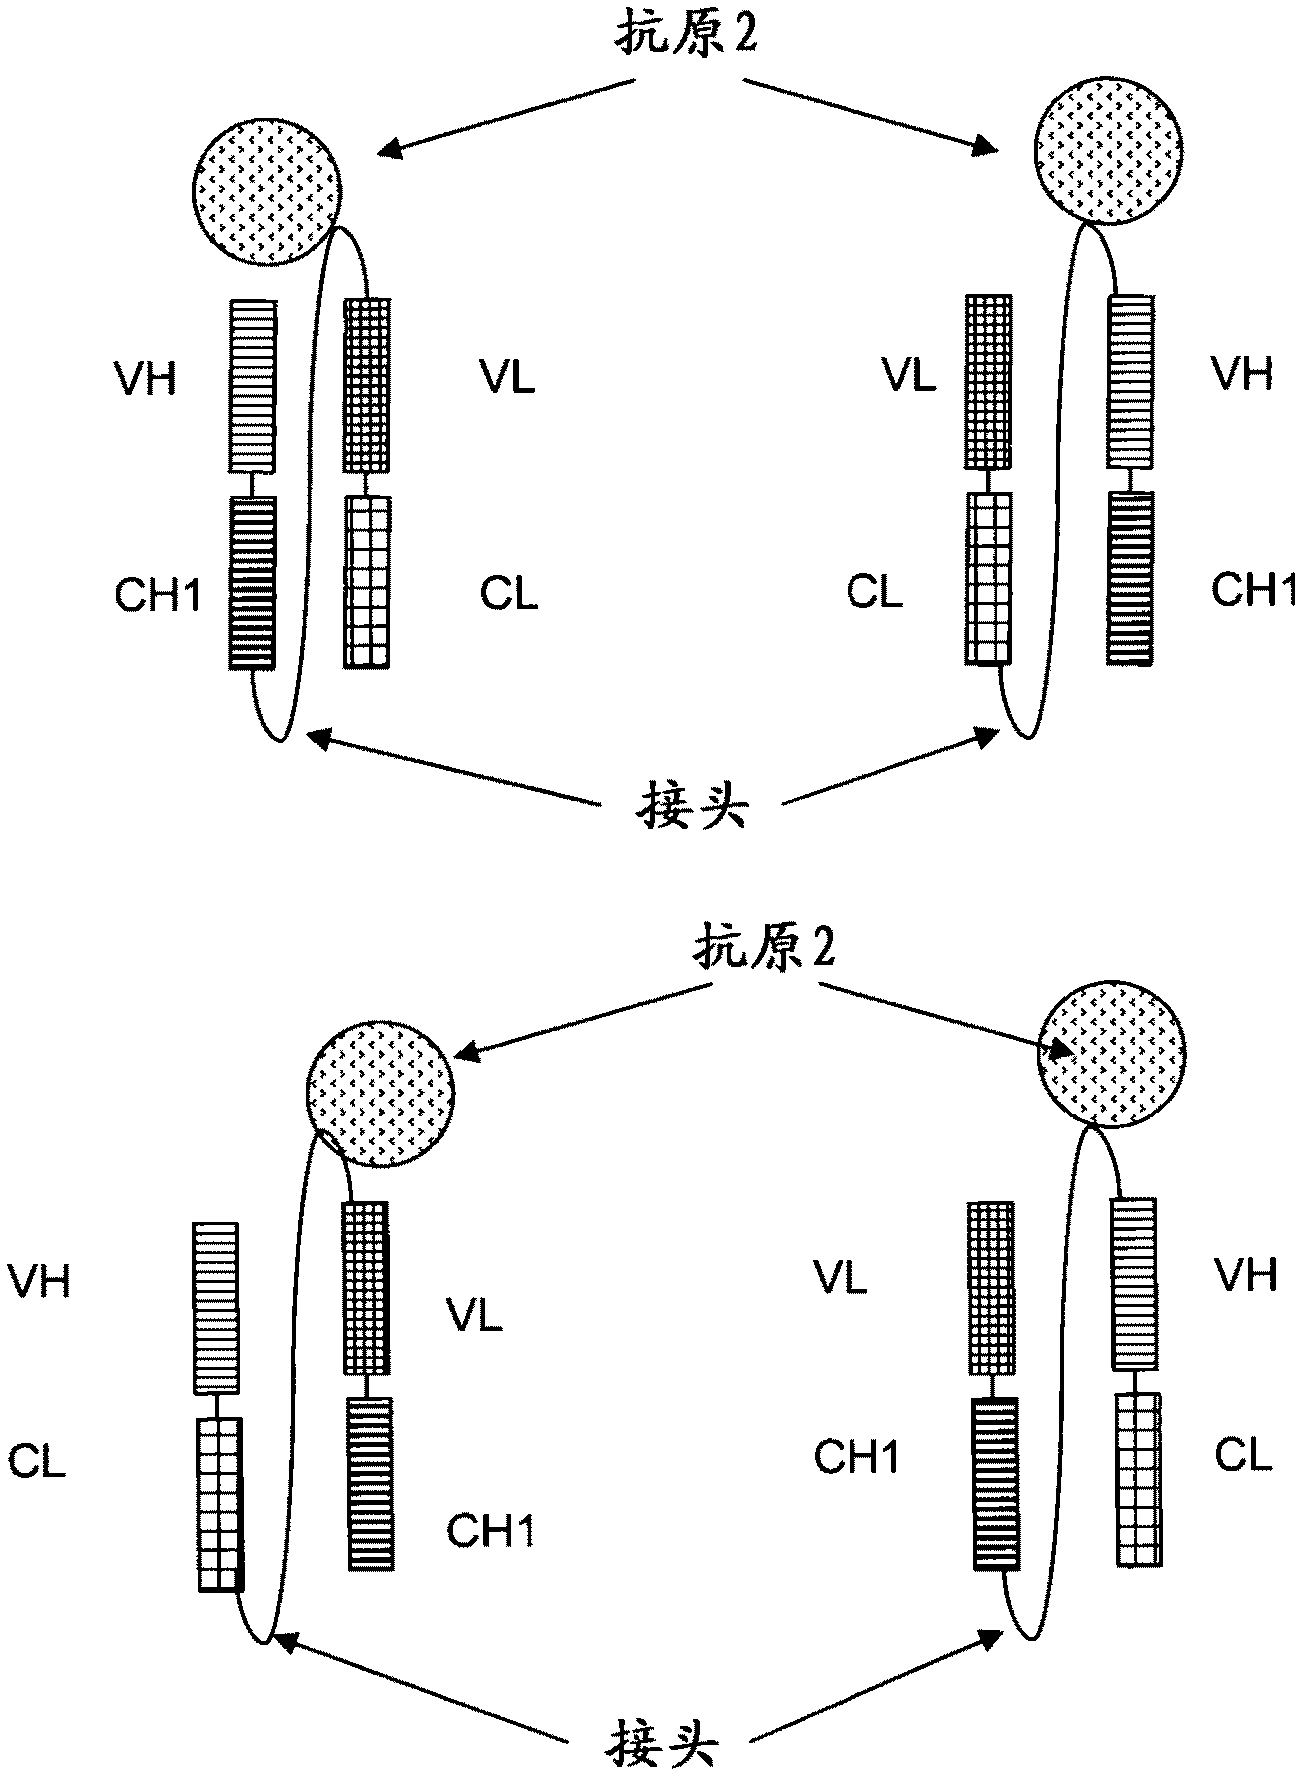 Multispecific antibodies comprising full length antibodies and single chain fab fragments